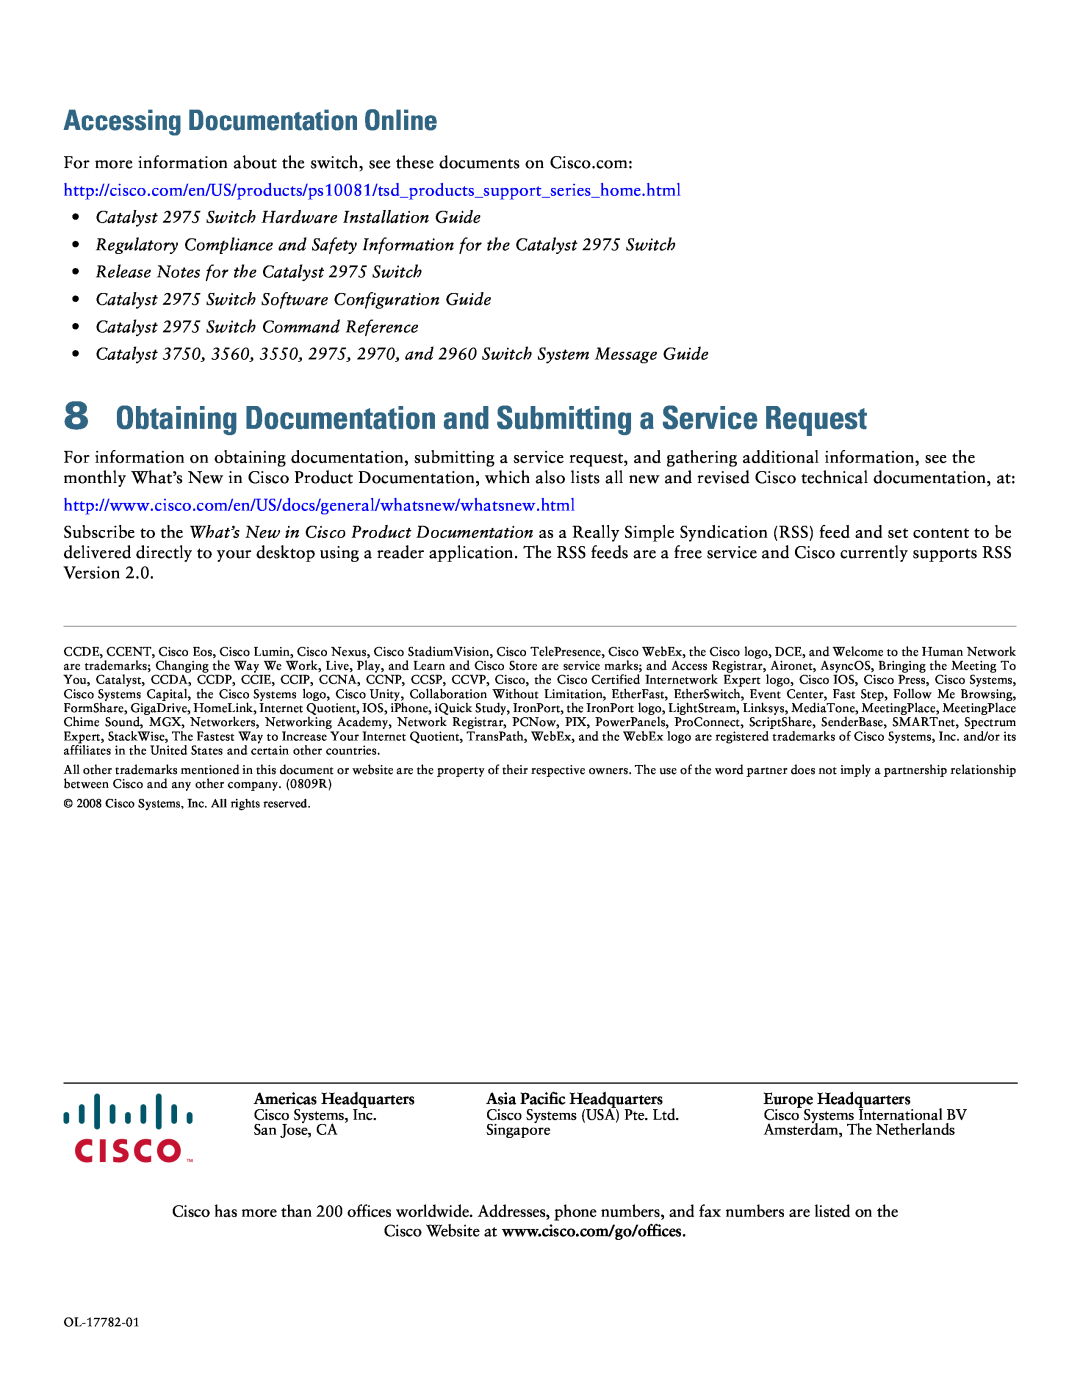 Cisco Systems 2975 manual Obtaining Documentation and Submitting a Service Request, Accessing Documentation Online 